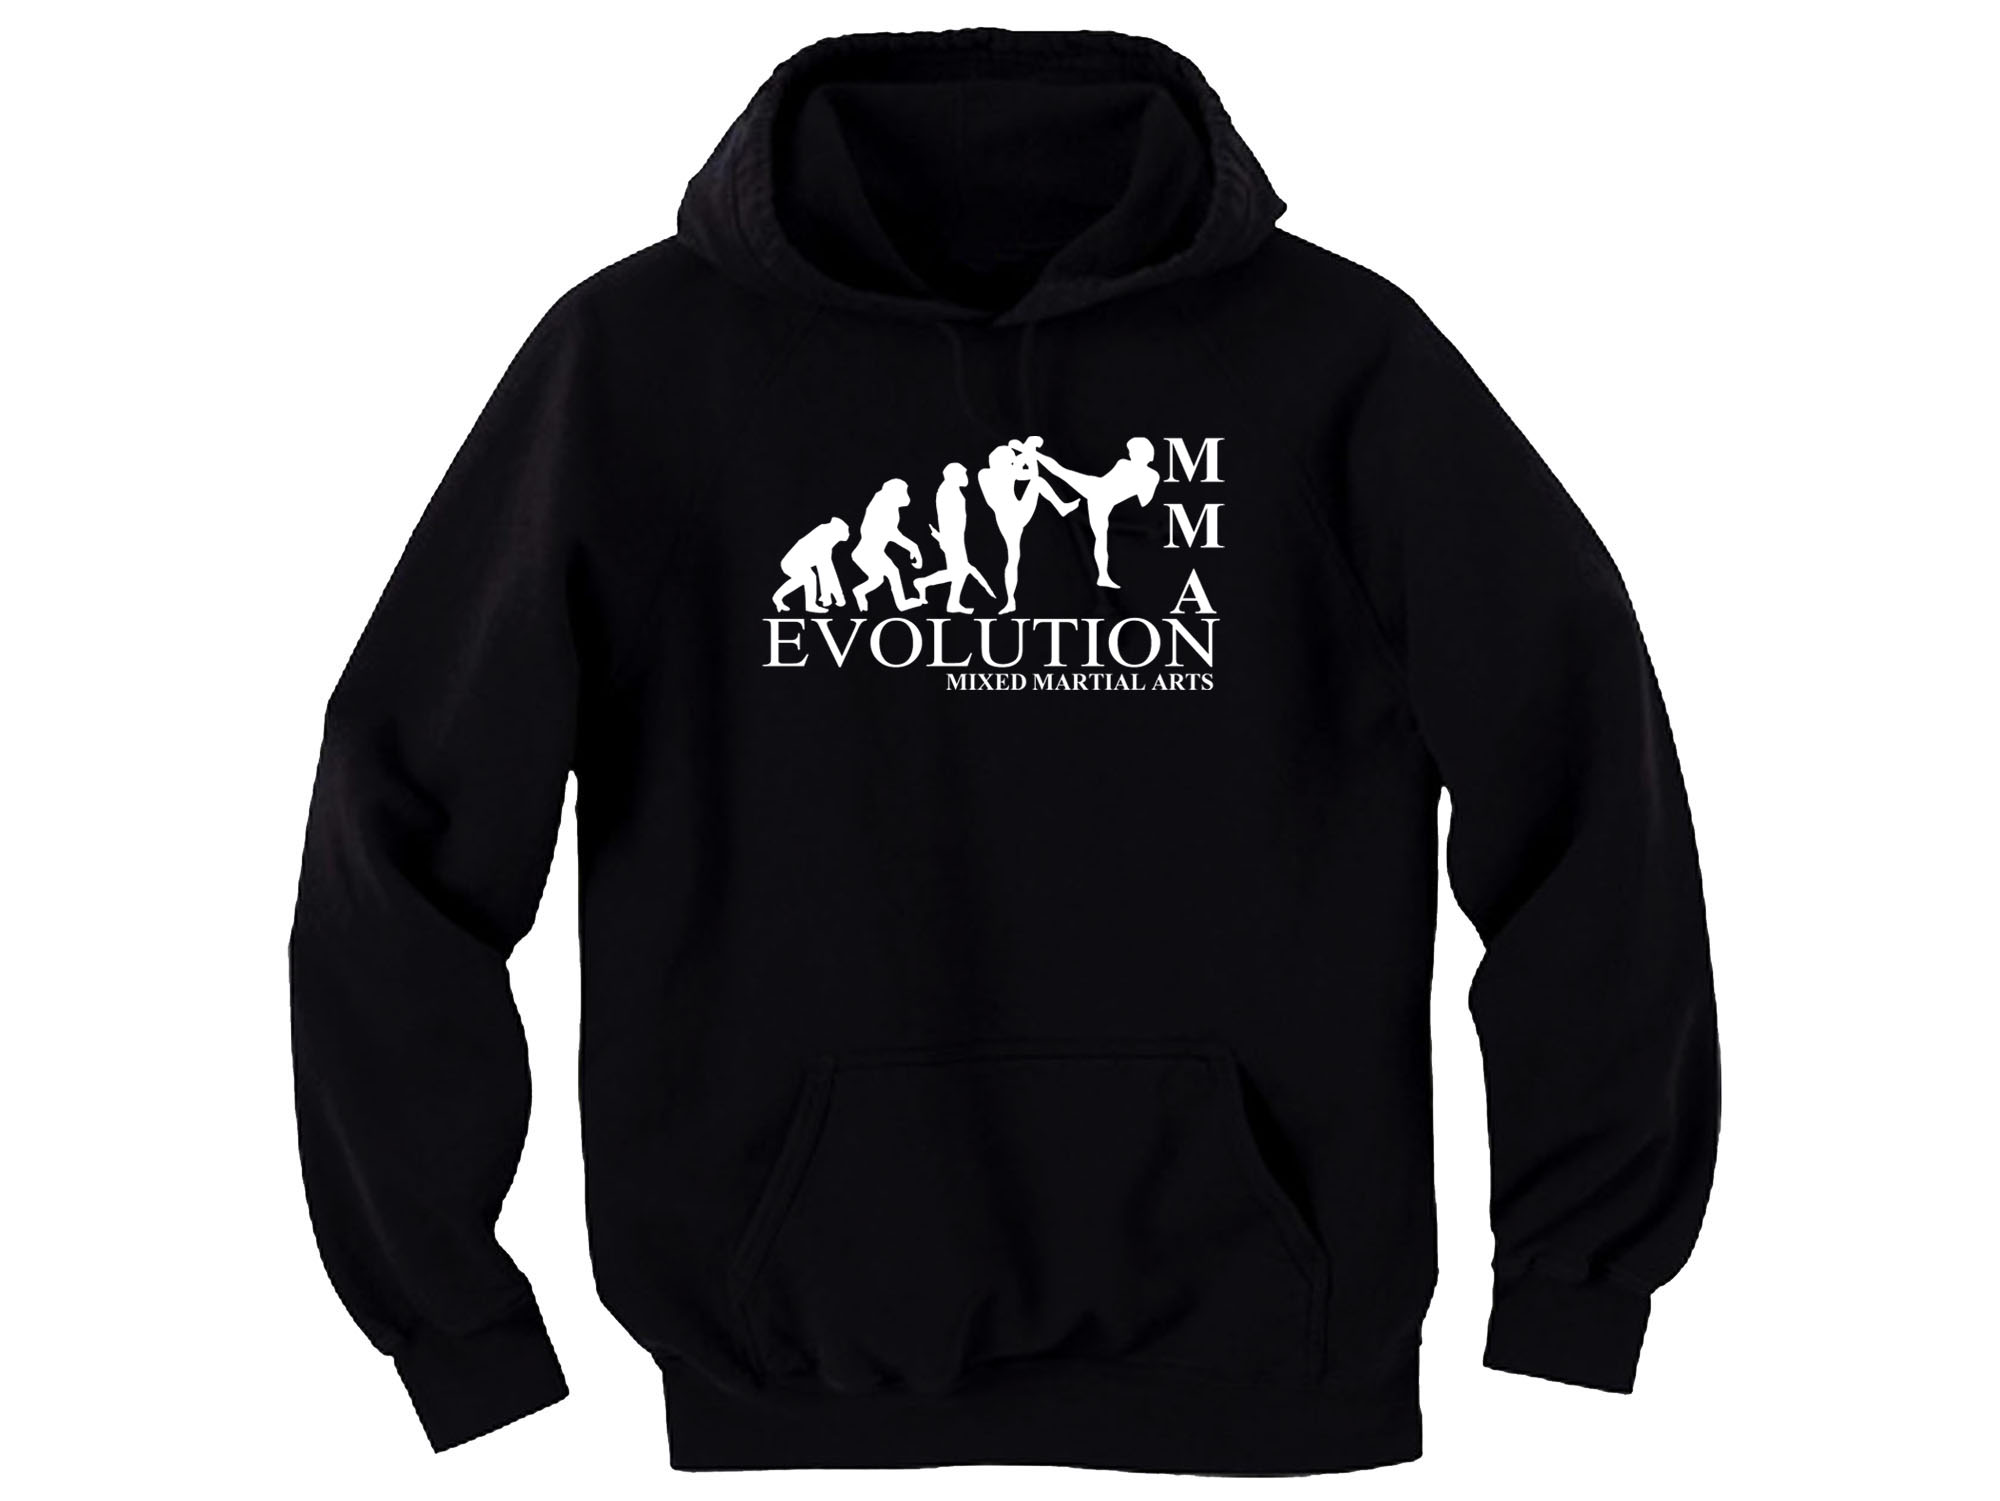 MMA evolution mixed martial arts pullover hoodie